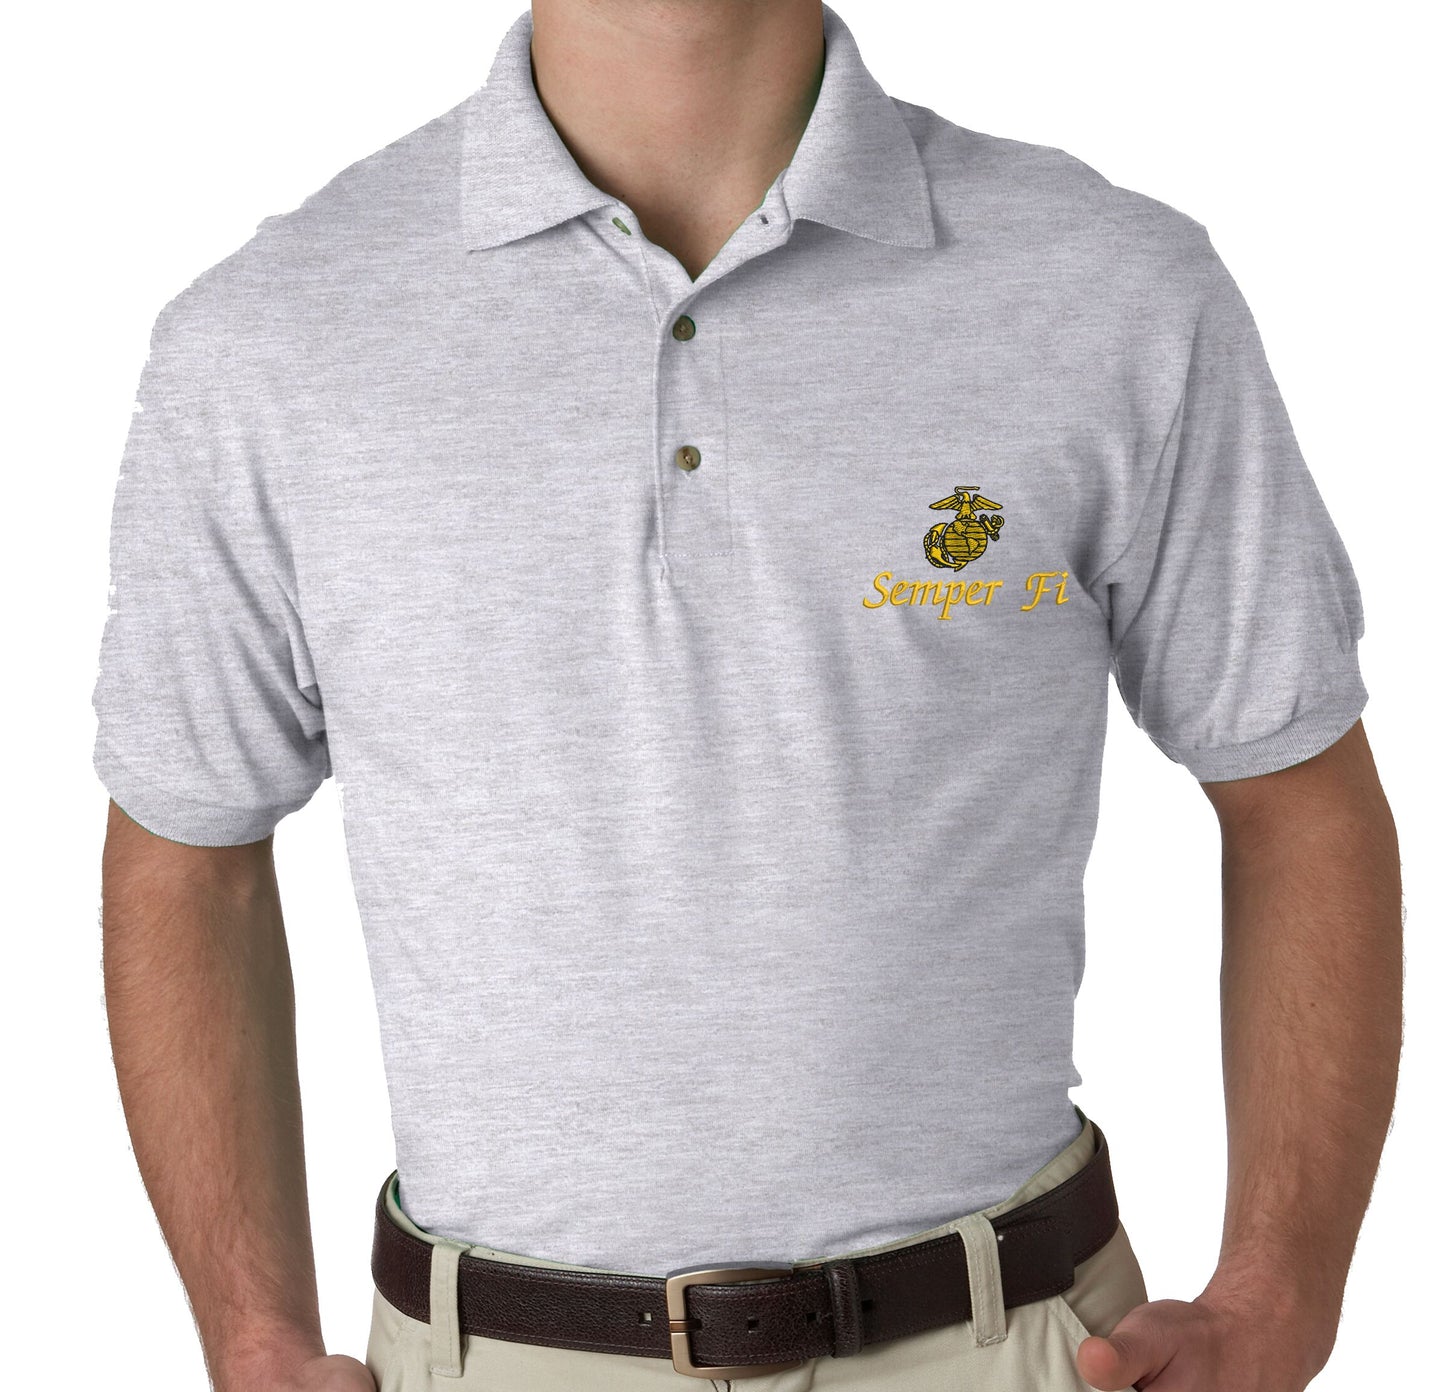 Semper Fi with Eagle, Globe and Anchor Polo Shirt